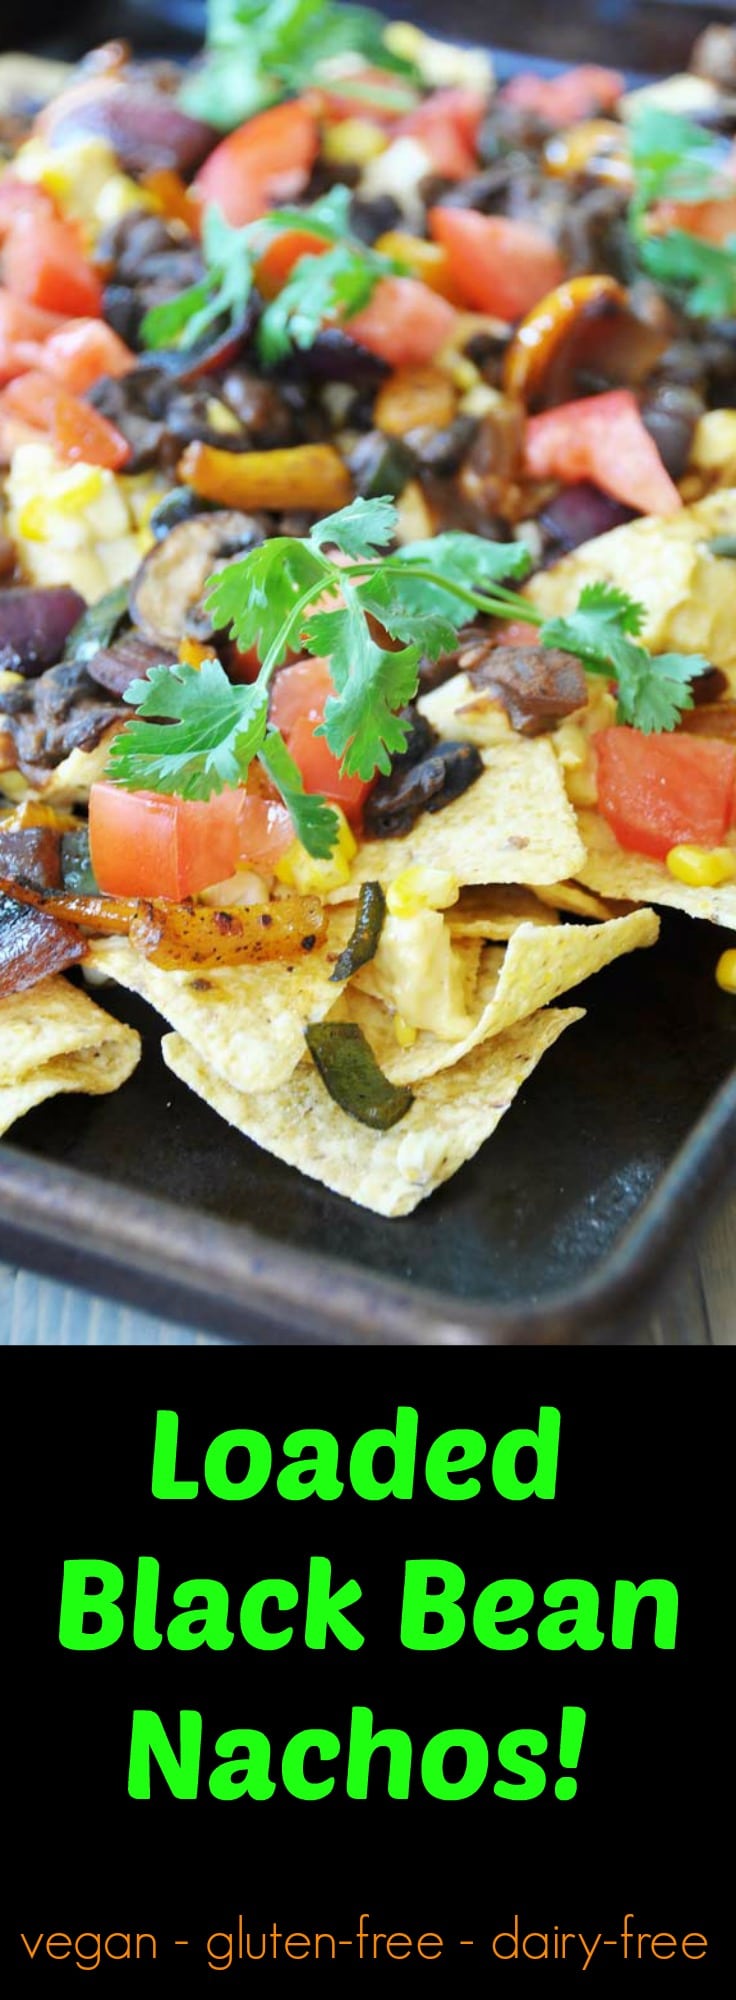 Loaded black bean and vegetable nachos! The perfect game day appetizer. vegan, gluten-free, and dairy-free